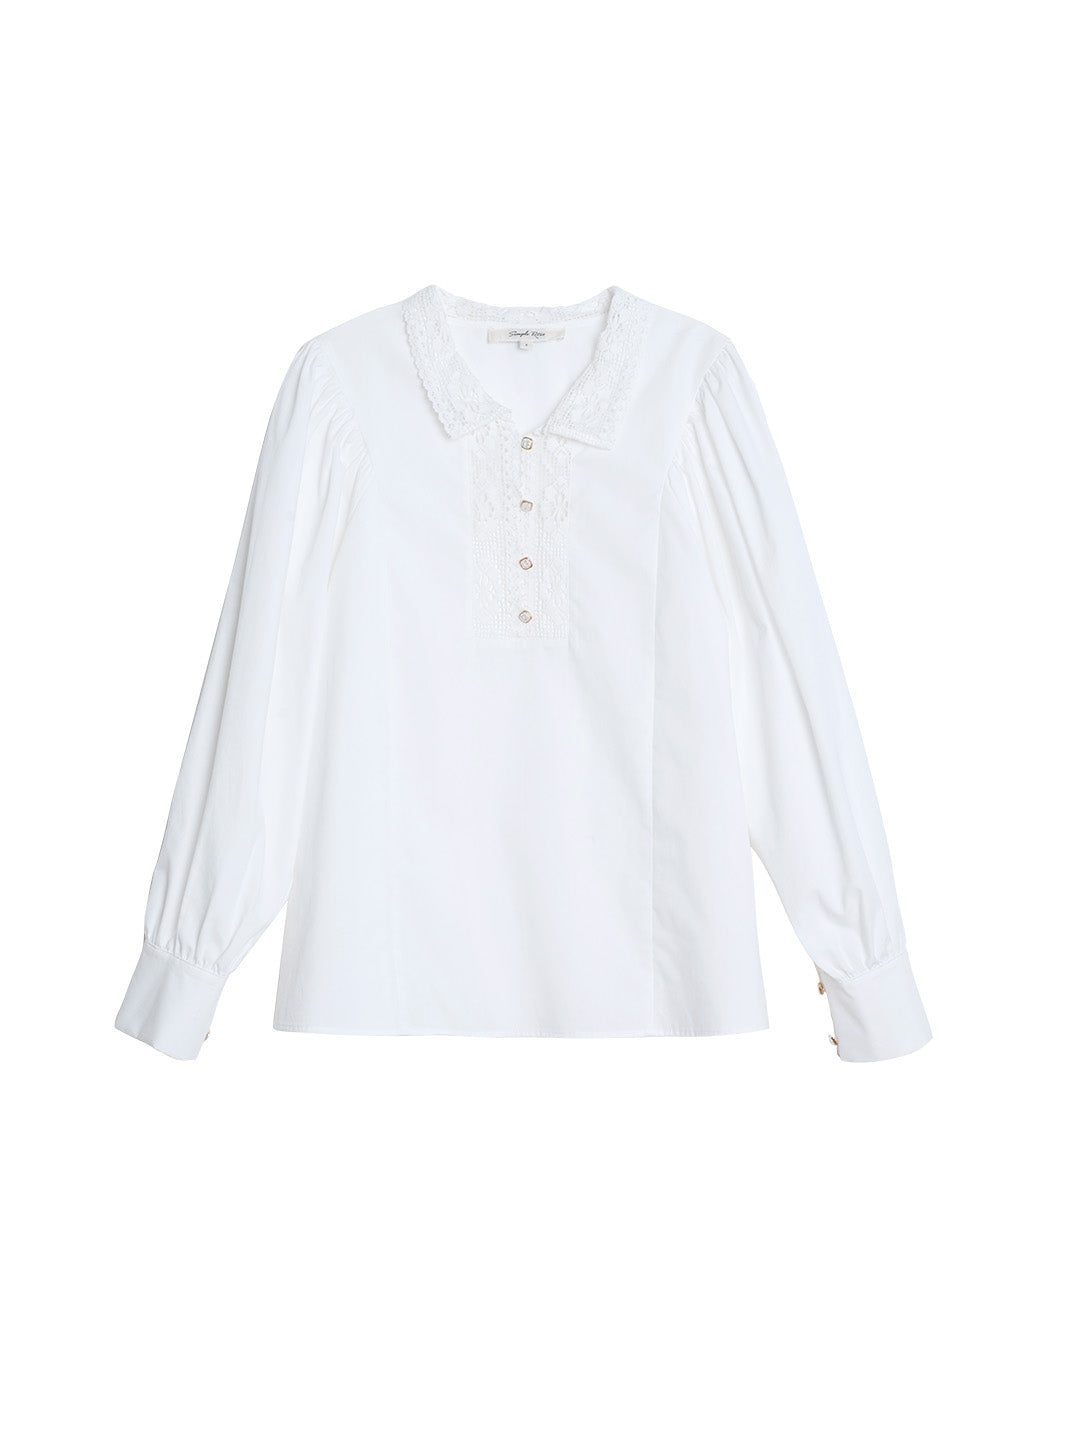 Hadleigh Lace Paneled Hollow Puff Sleeve Blouse